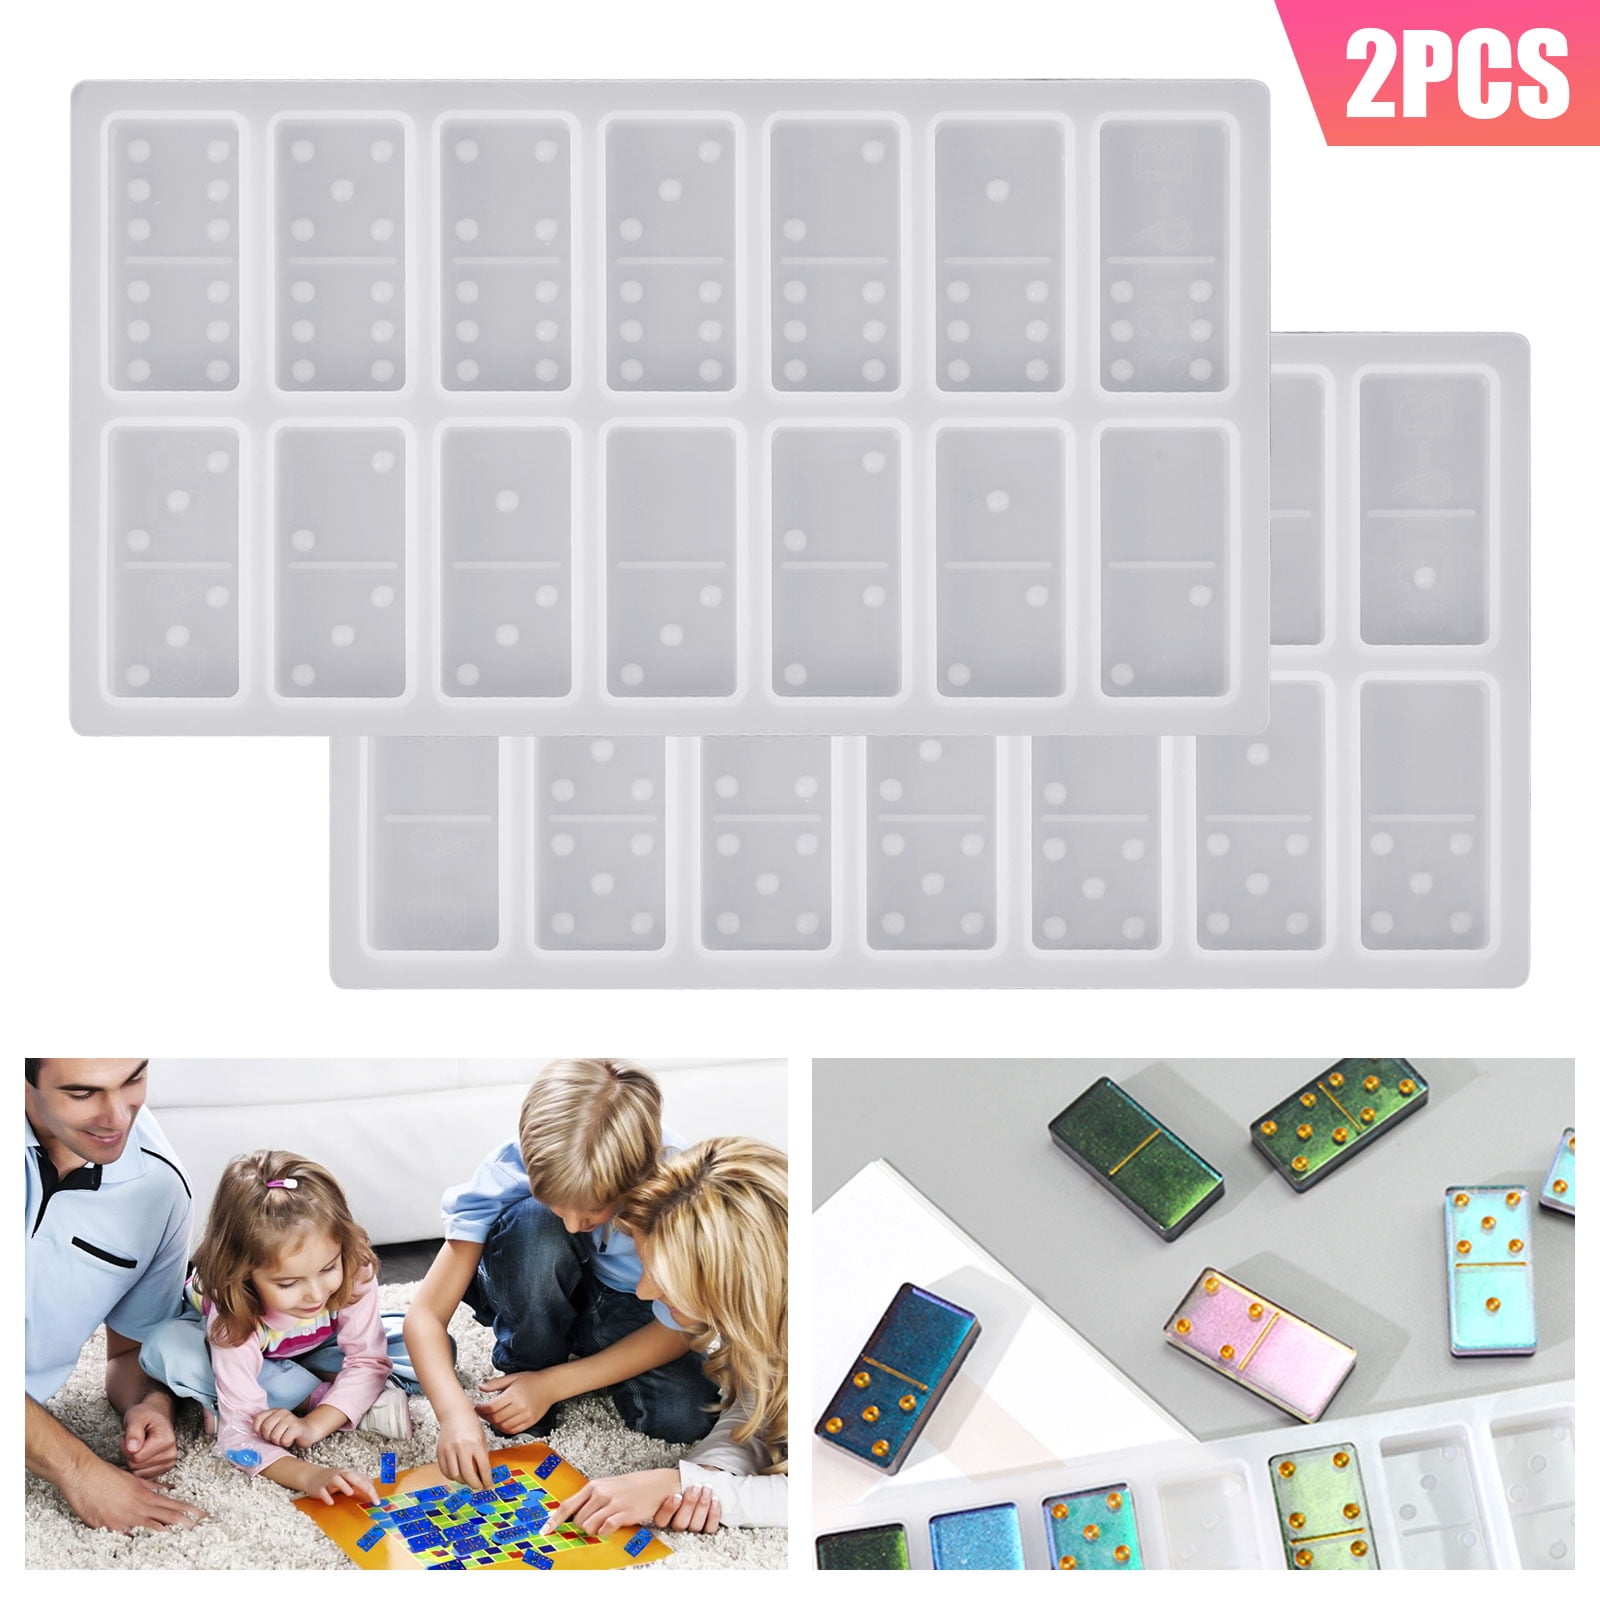 2PCS Silicone Dominoes Game Toy Resin Mold Epoxy Craft DIY Casting Mould 